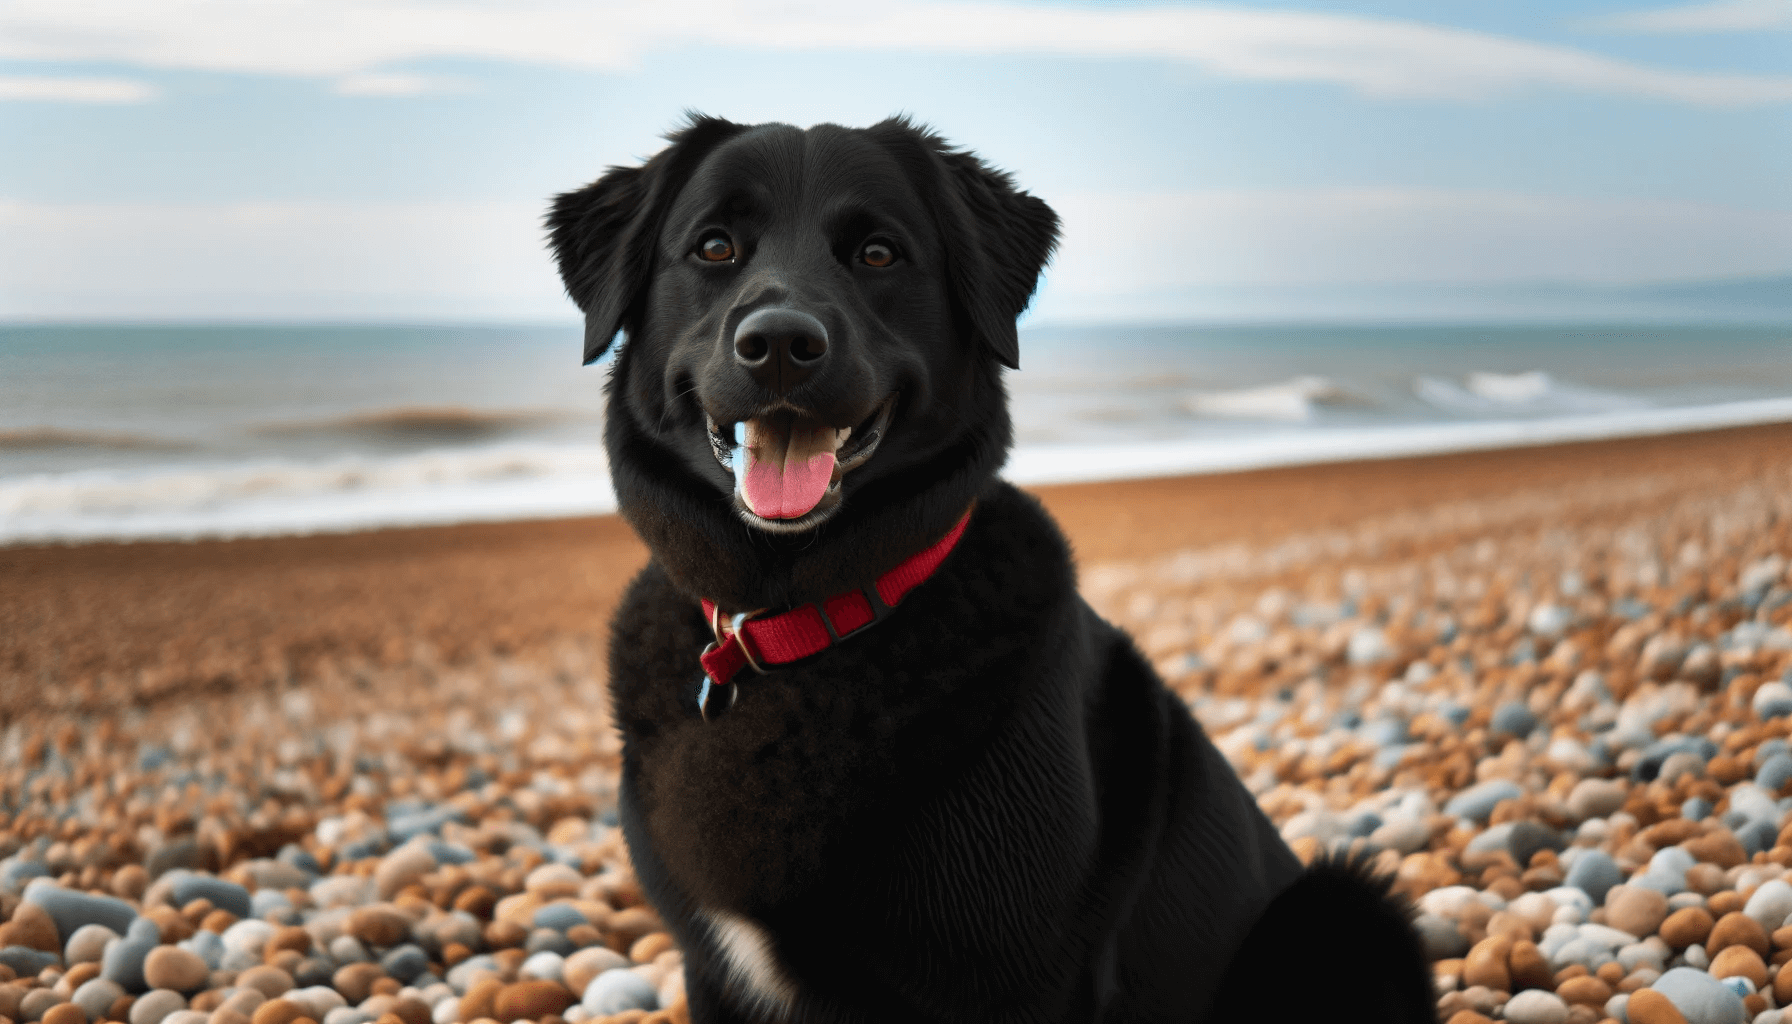 Jovial Borador Border Collie Lab Mix with a shiny black coat and a red collar, seated on a pebbly shore.